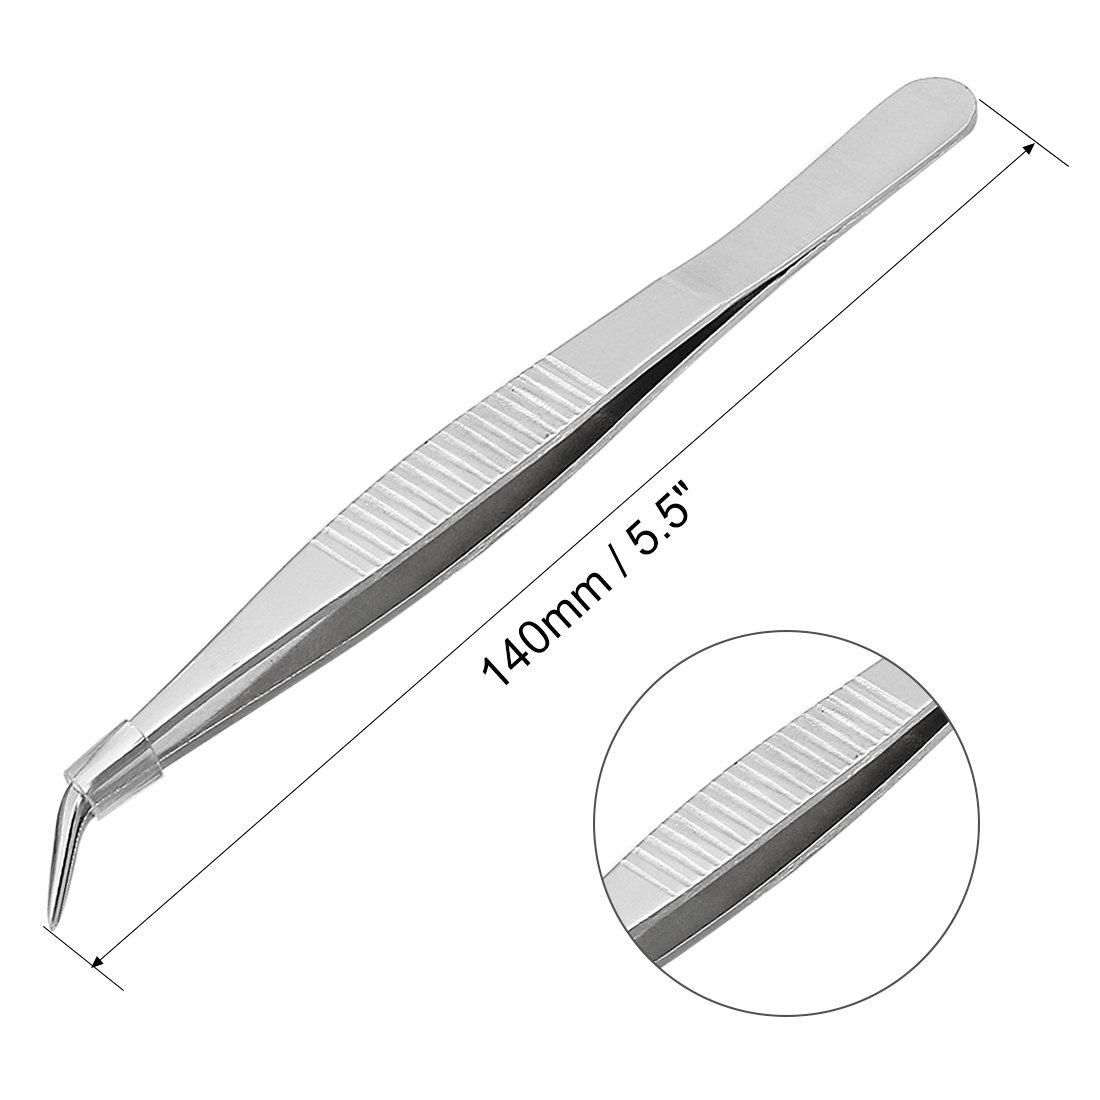 uxcell 2 Pcs 5.5-Inch Stainless Steel Tweezers with Curved Pointed Serrated Tip